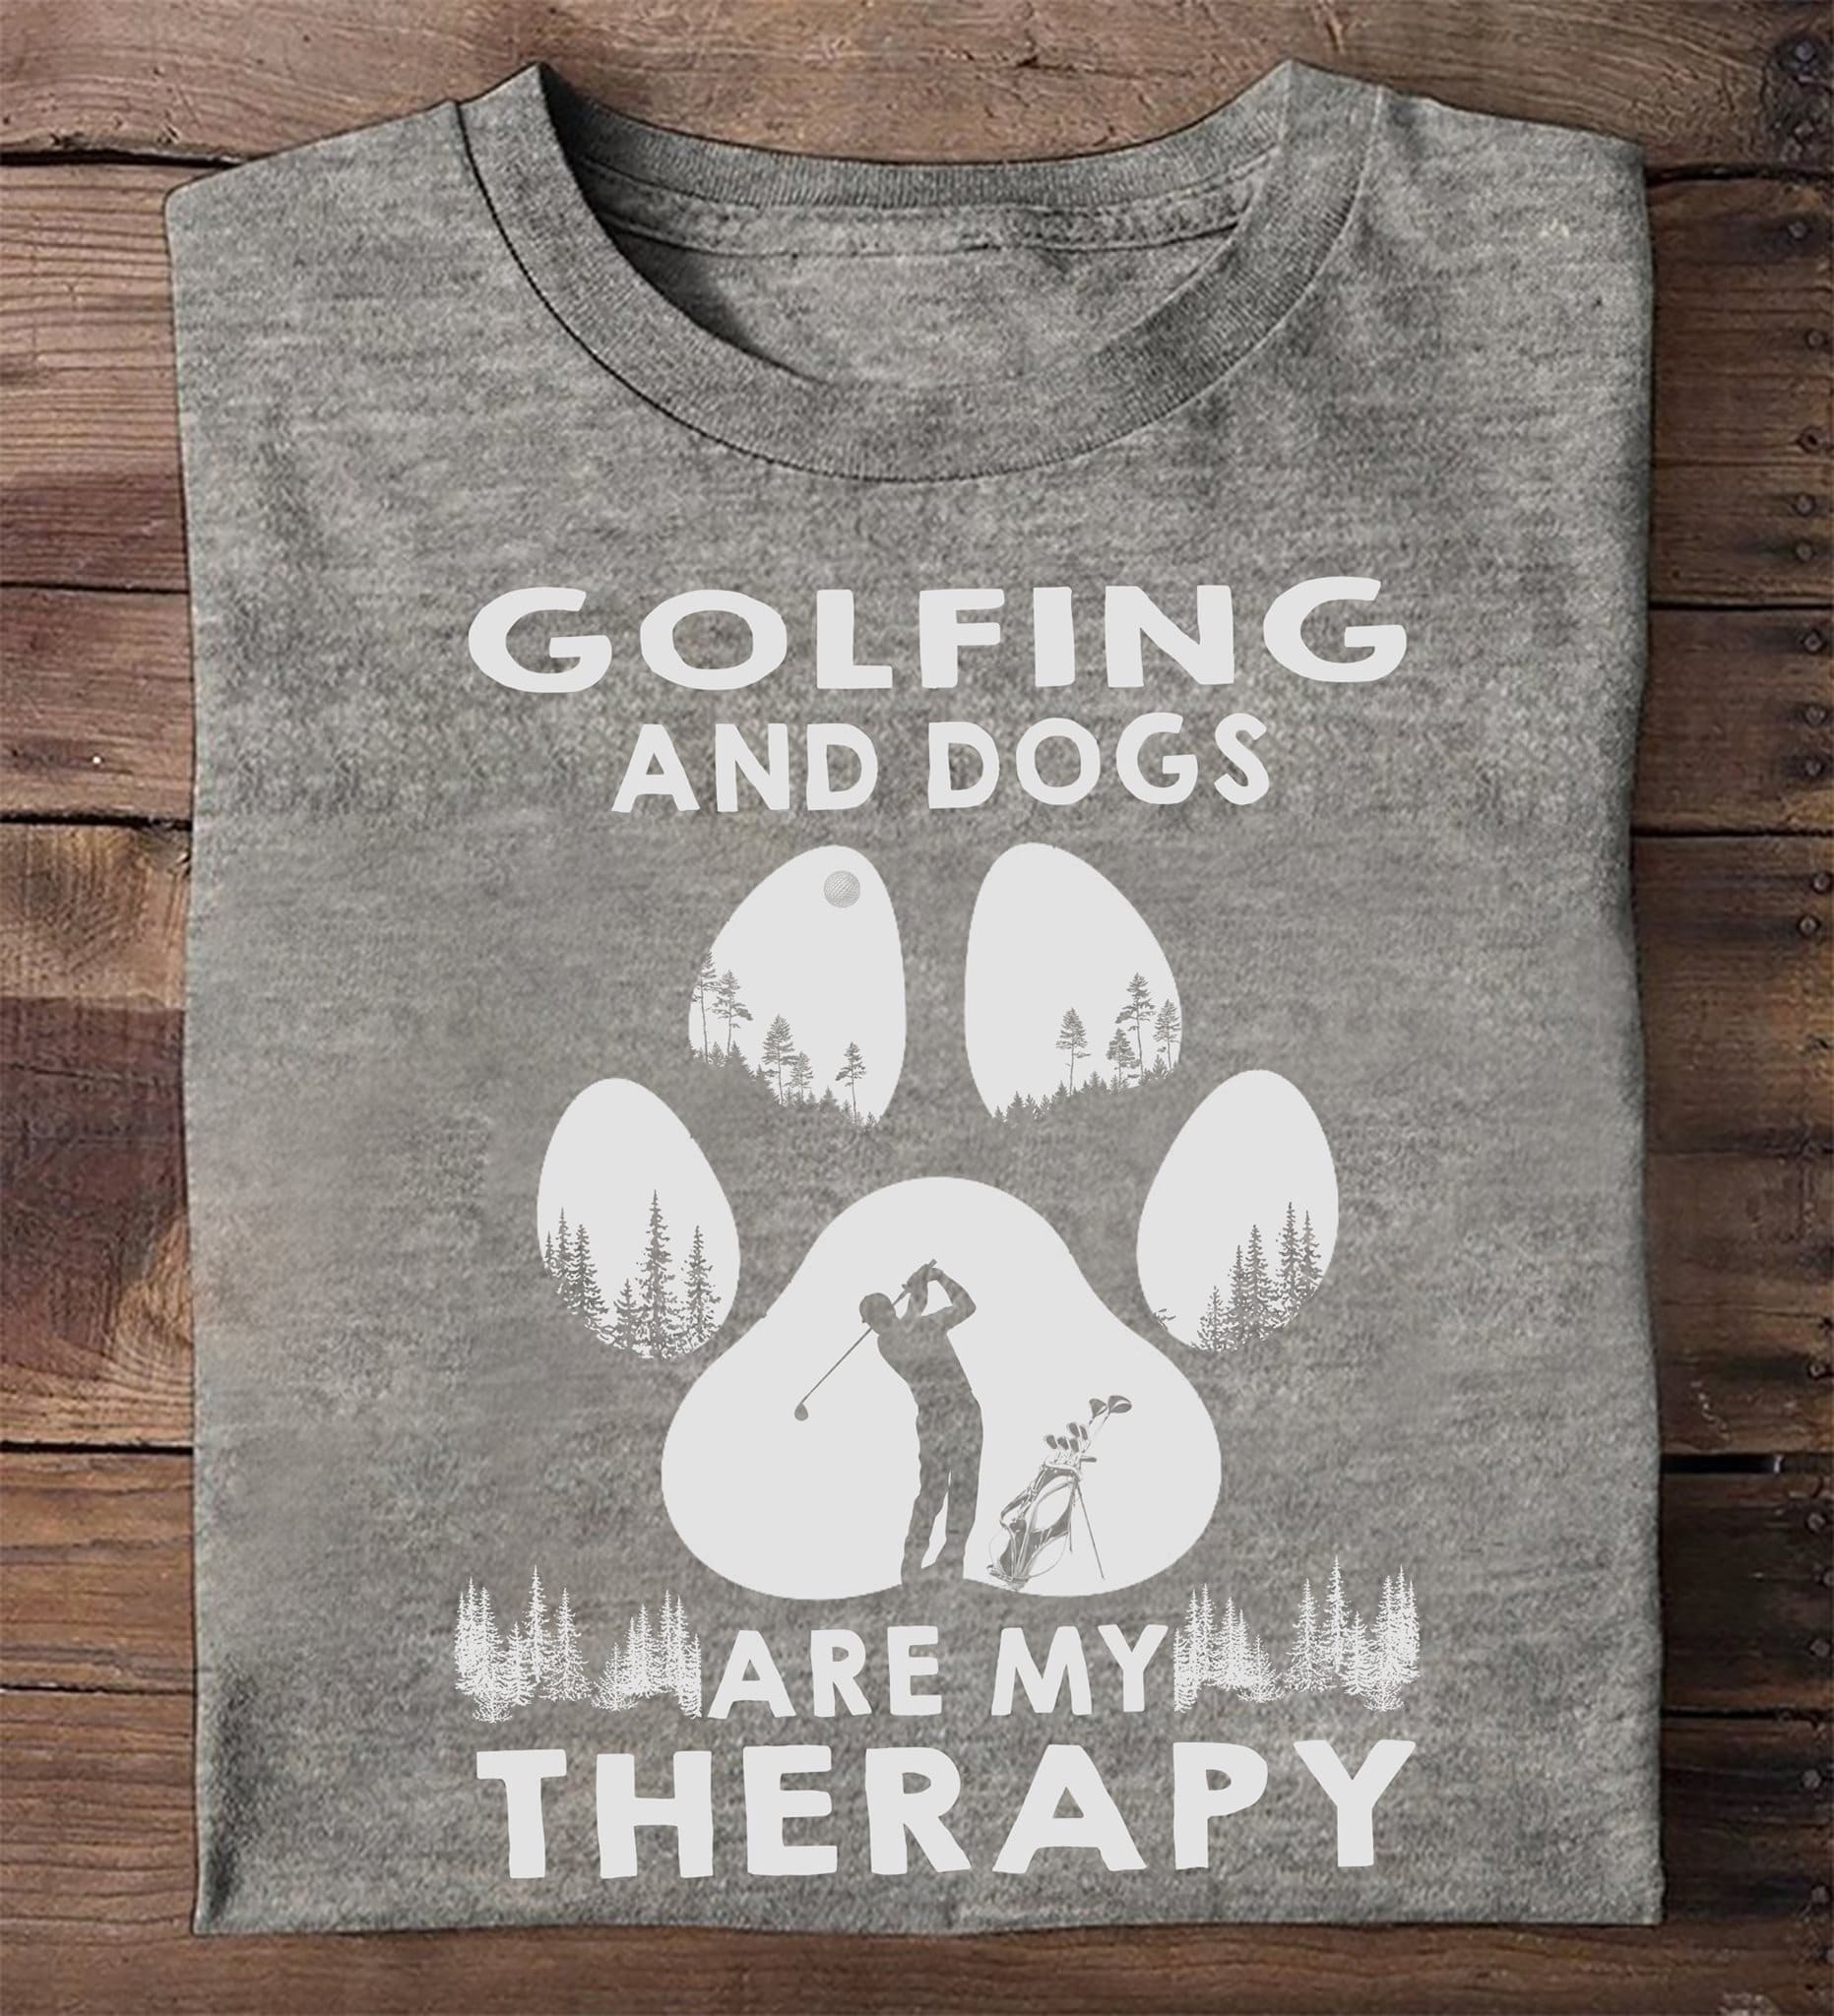 Golfing and dogs are my therapy - Golfer T-shirt, Play golf pet dog